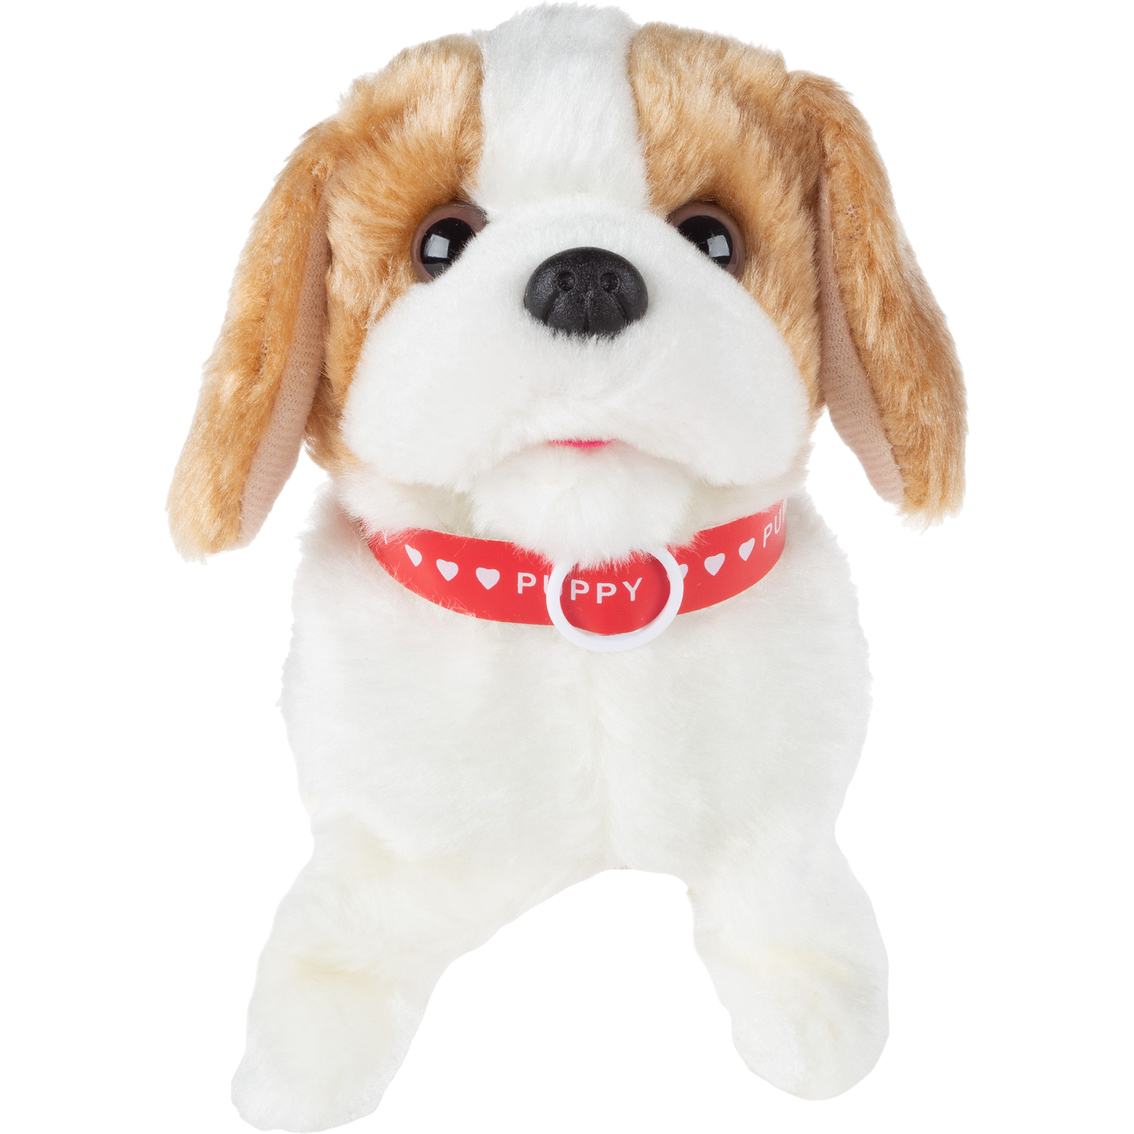 Happy Trails Interactive Plush Puppy Toy - Image 5 of 8